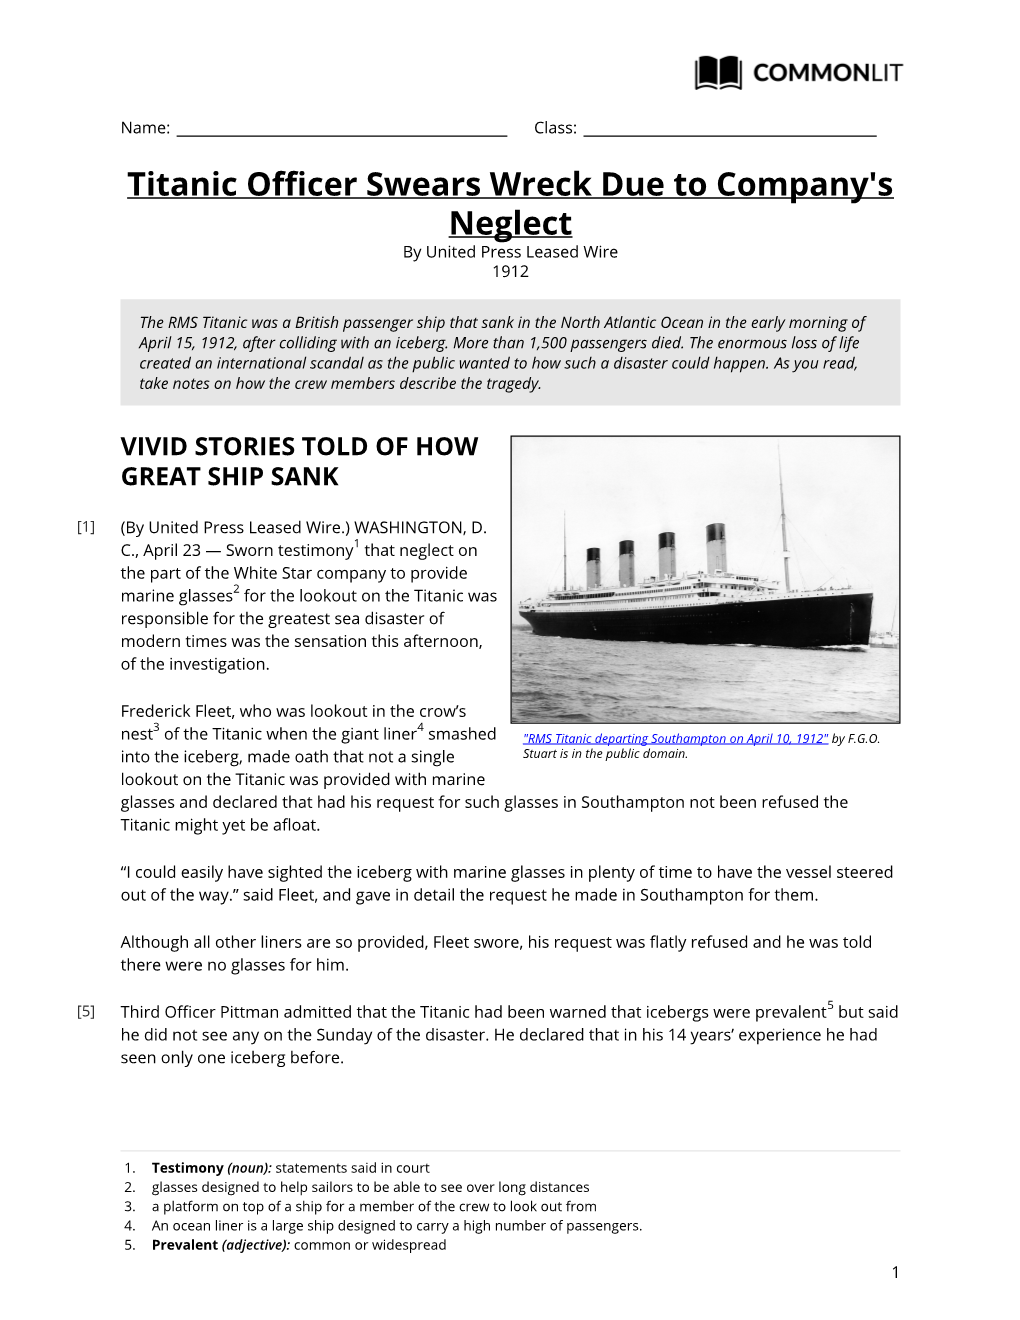 Commonlit | Titanic Officer Swears Wreck Due to Company's Neglect